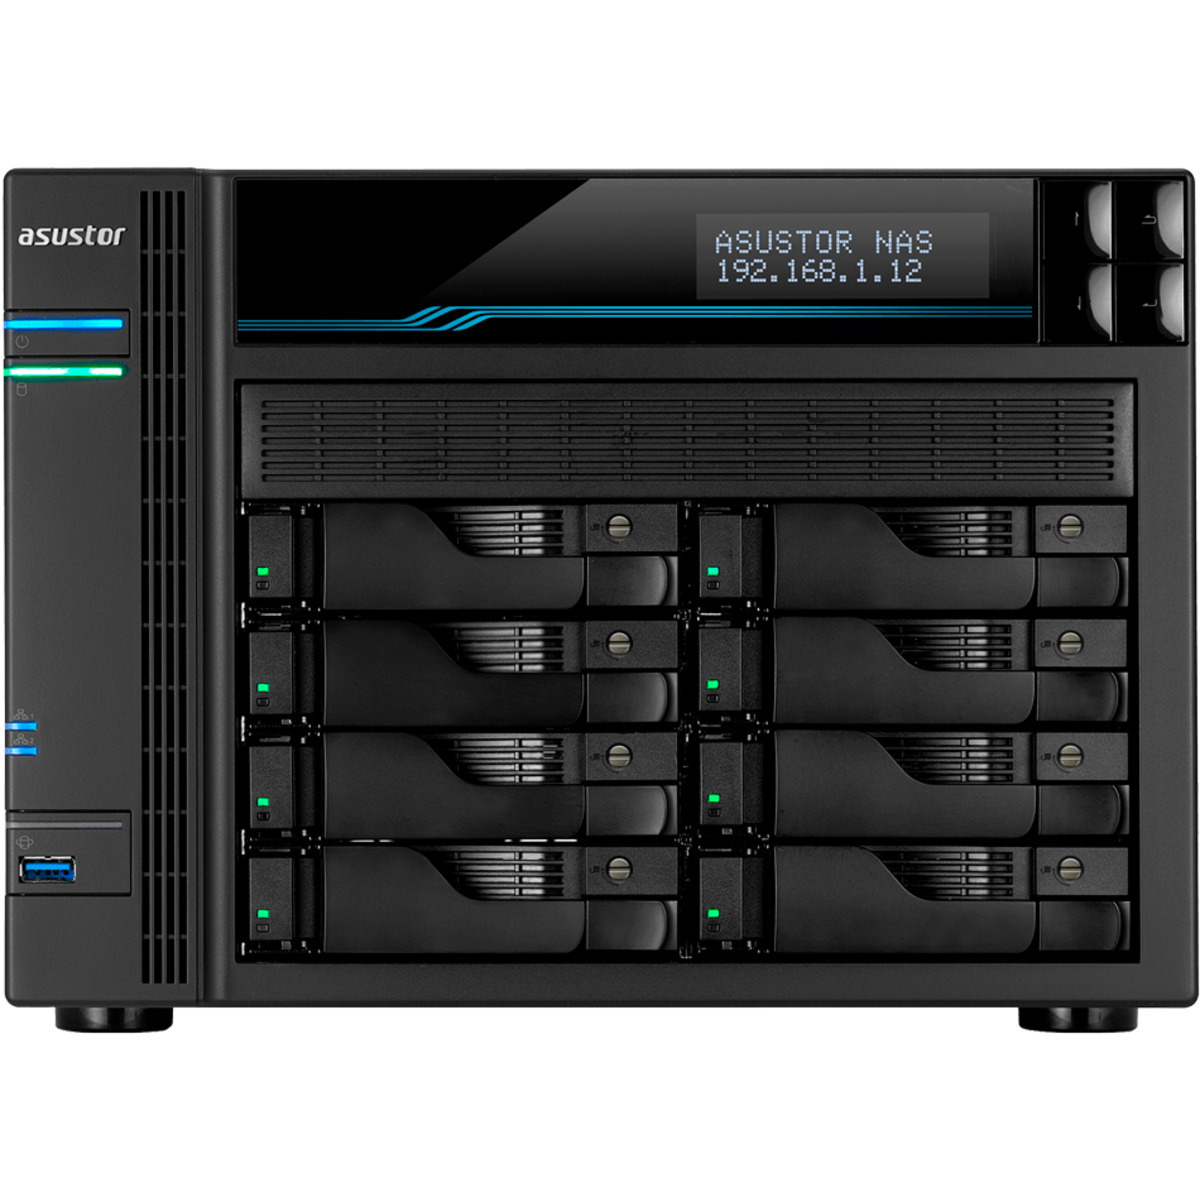 ASUSTOR AS6508T Lockerstor 8 70tb 8-Bay Desktop Multimedia / Power User / Business NAS - Network Attached Storage Device 7x10tb Seagate IronWolf Pro ST10000NT001 3.5 7200rpm SATA 6Gb/s HDD NAS Class Drives Installed - Burn-In Tested - ON SALE - FREE RAM UPGRADE AS6508T Lockerstor 8